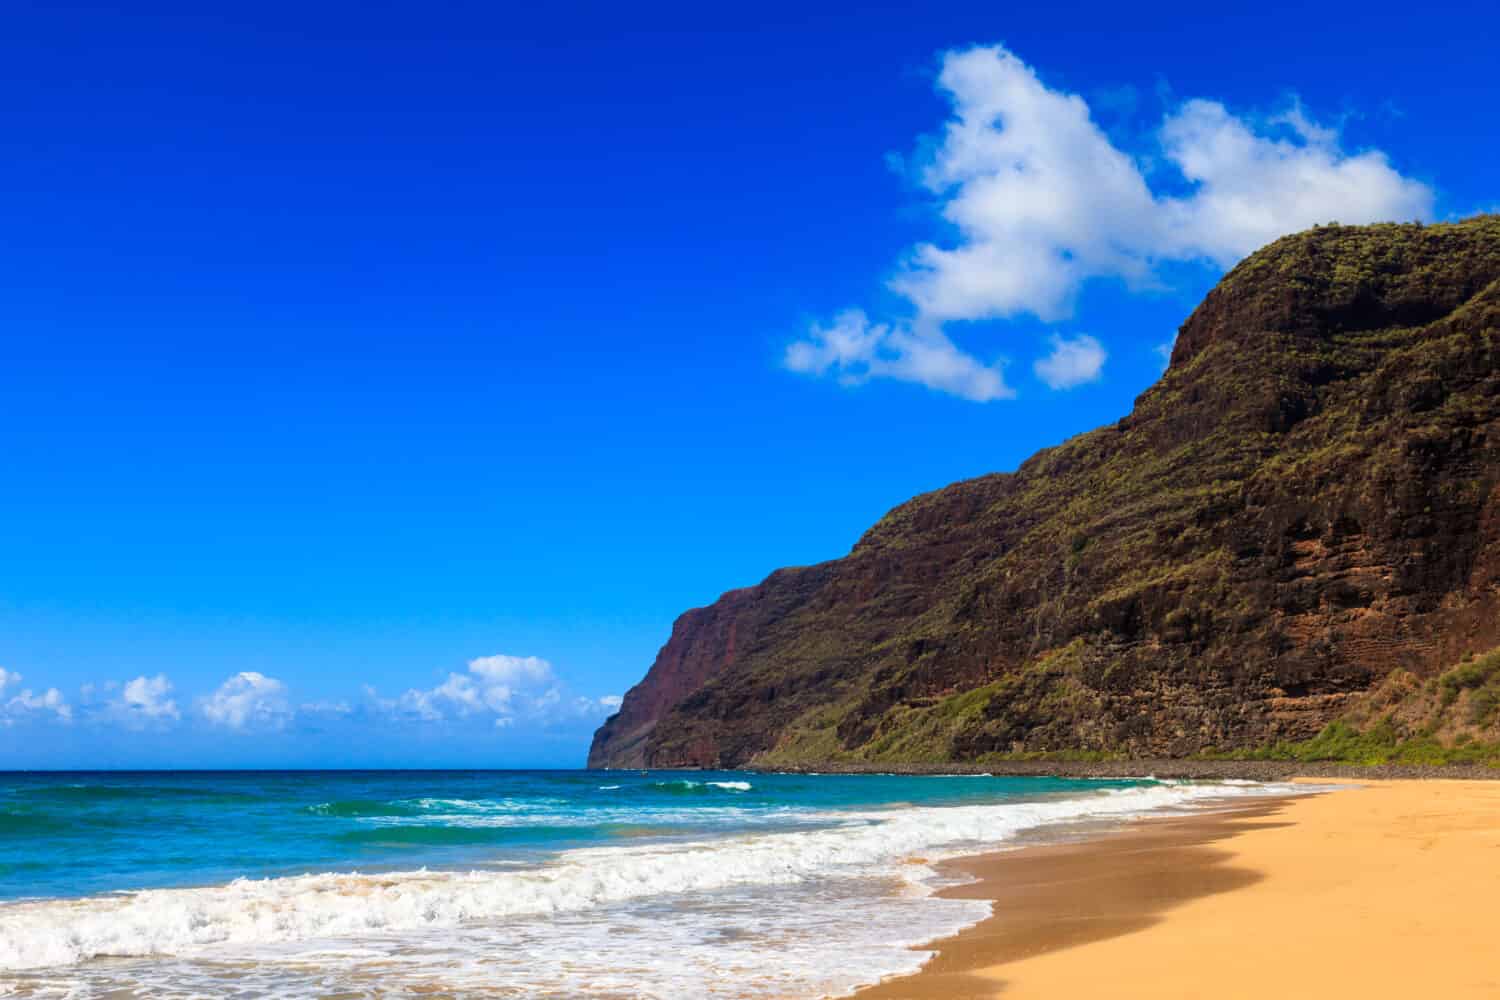 <p>On Kauai's most northern point is Nualolo Kai Beach, accessible only by hiking or boat. The area is rich in history, for example, ancient petroglyphs can be found all over the beach. The clear waters offer a view of many tropical fish, sea turtles, dolphins, and a variety of coral.</p>